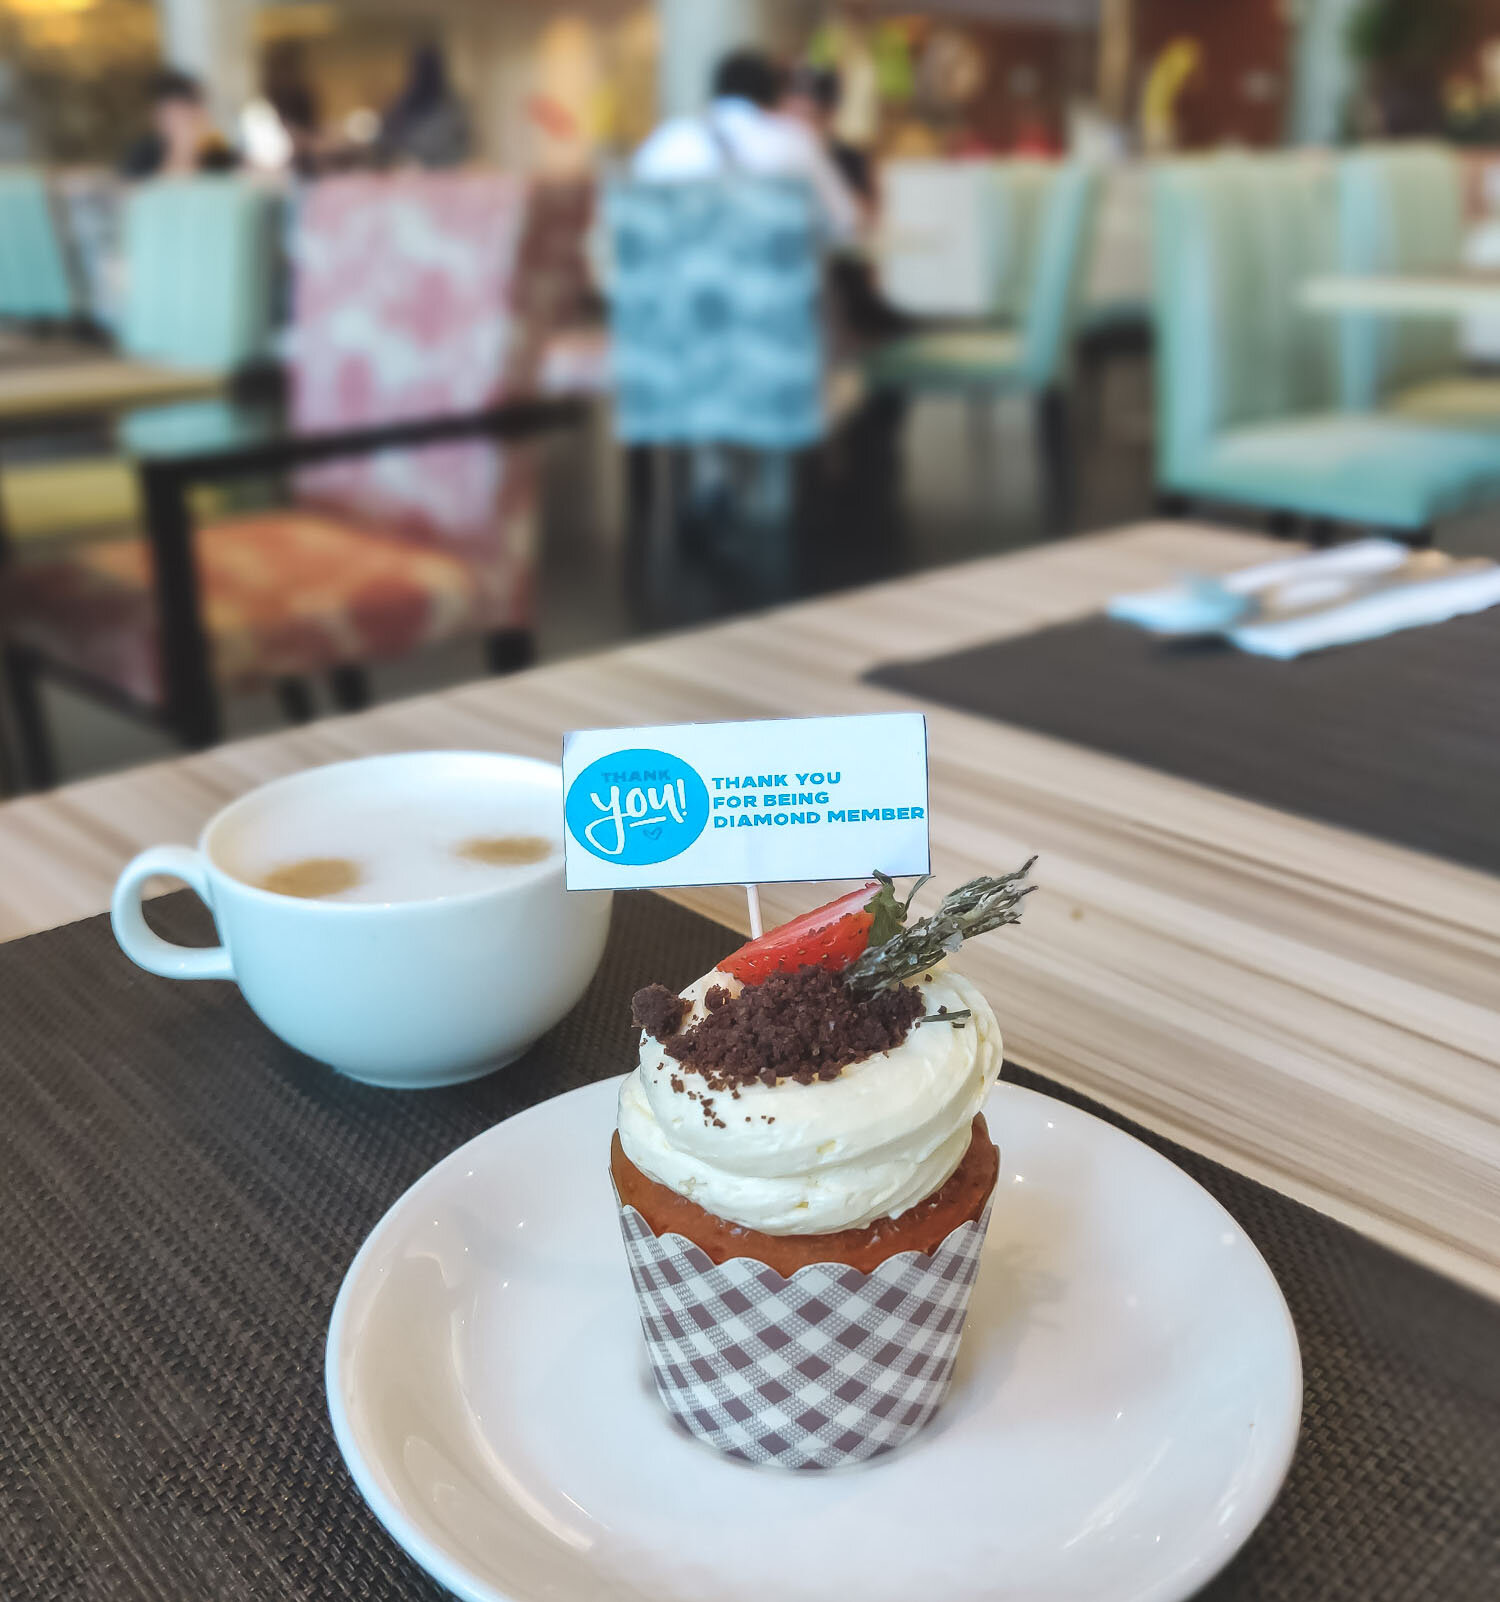 Complimentary cupcake for Diamond members (only on the first breakfast)